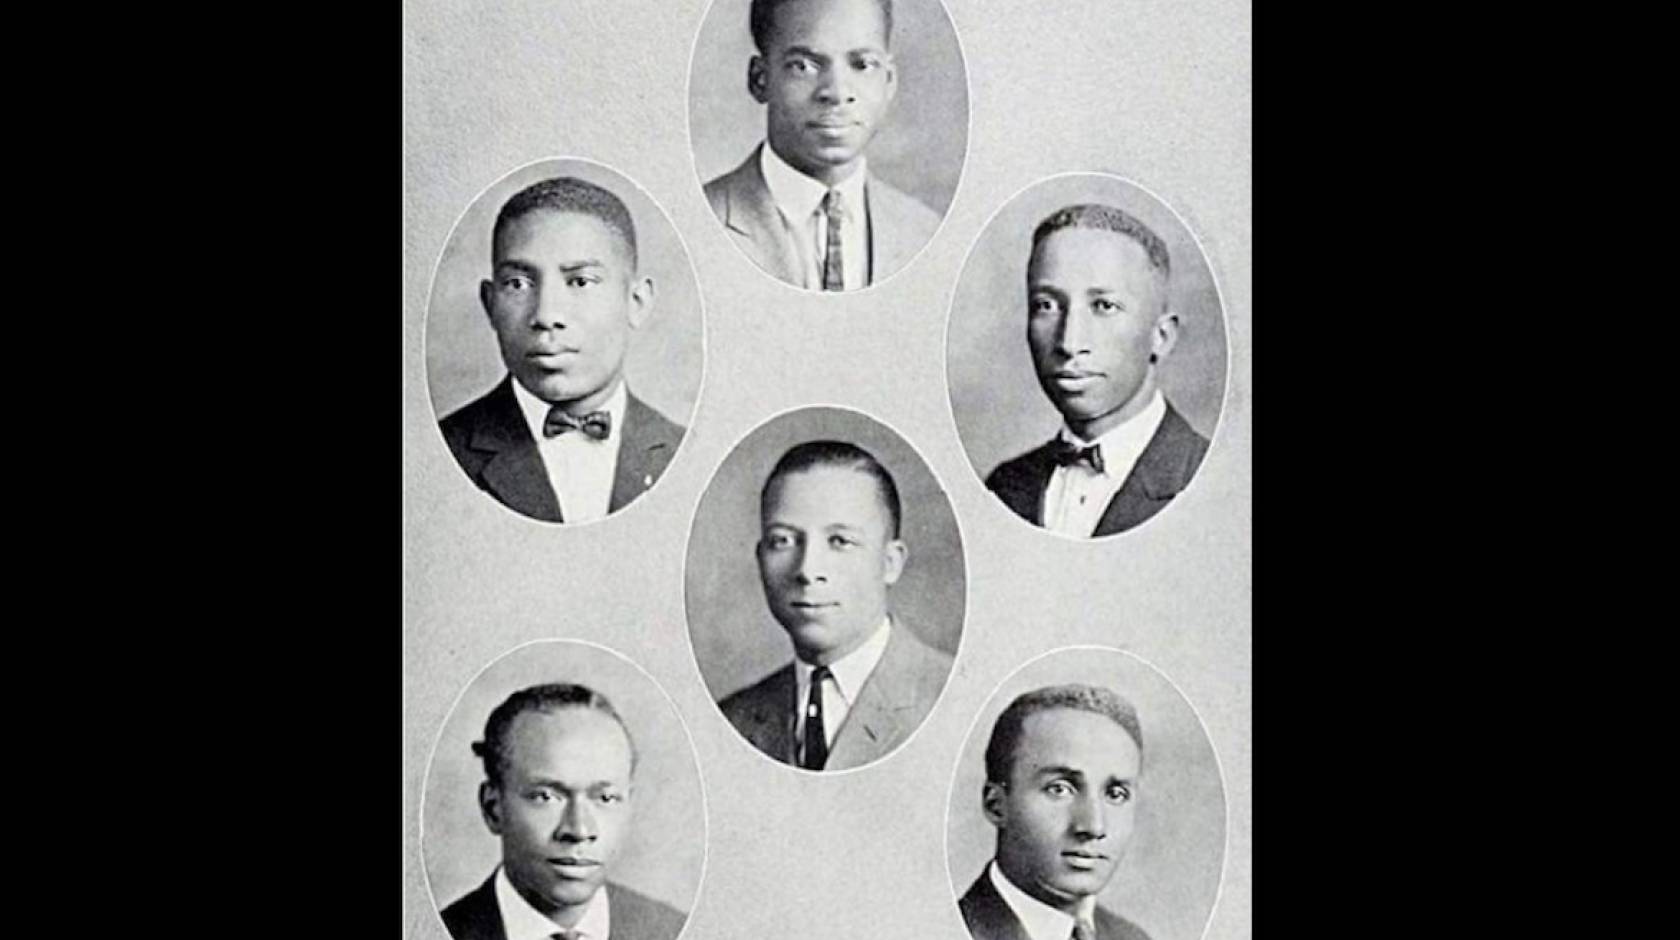 A grouping of 100-year-old portraits of young Black men